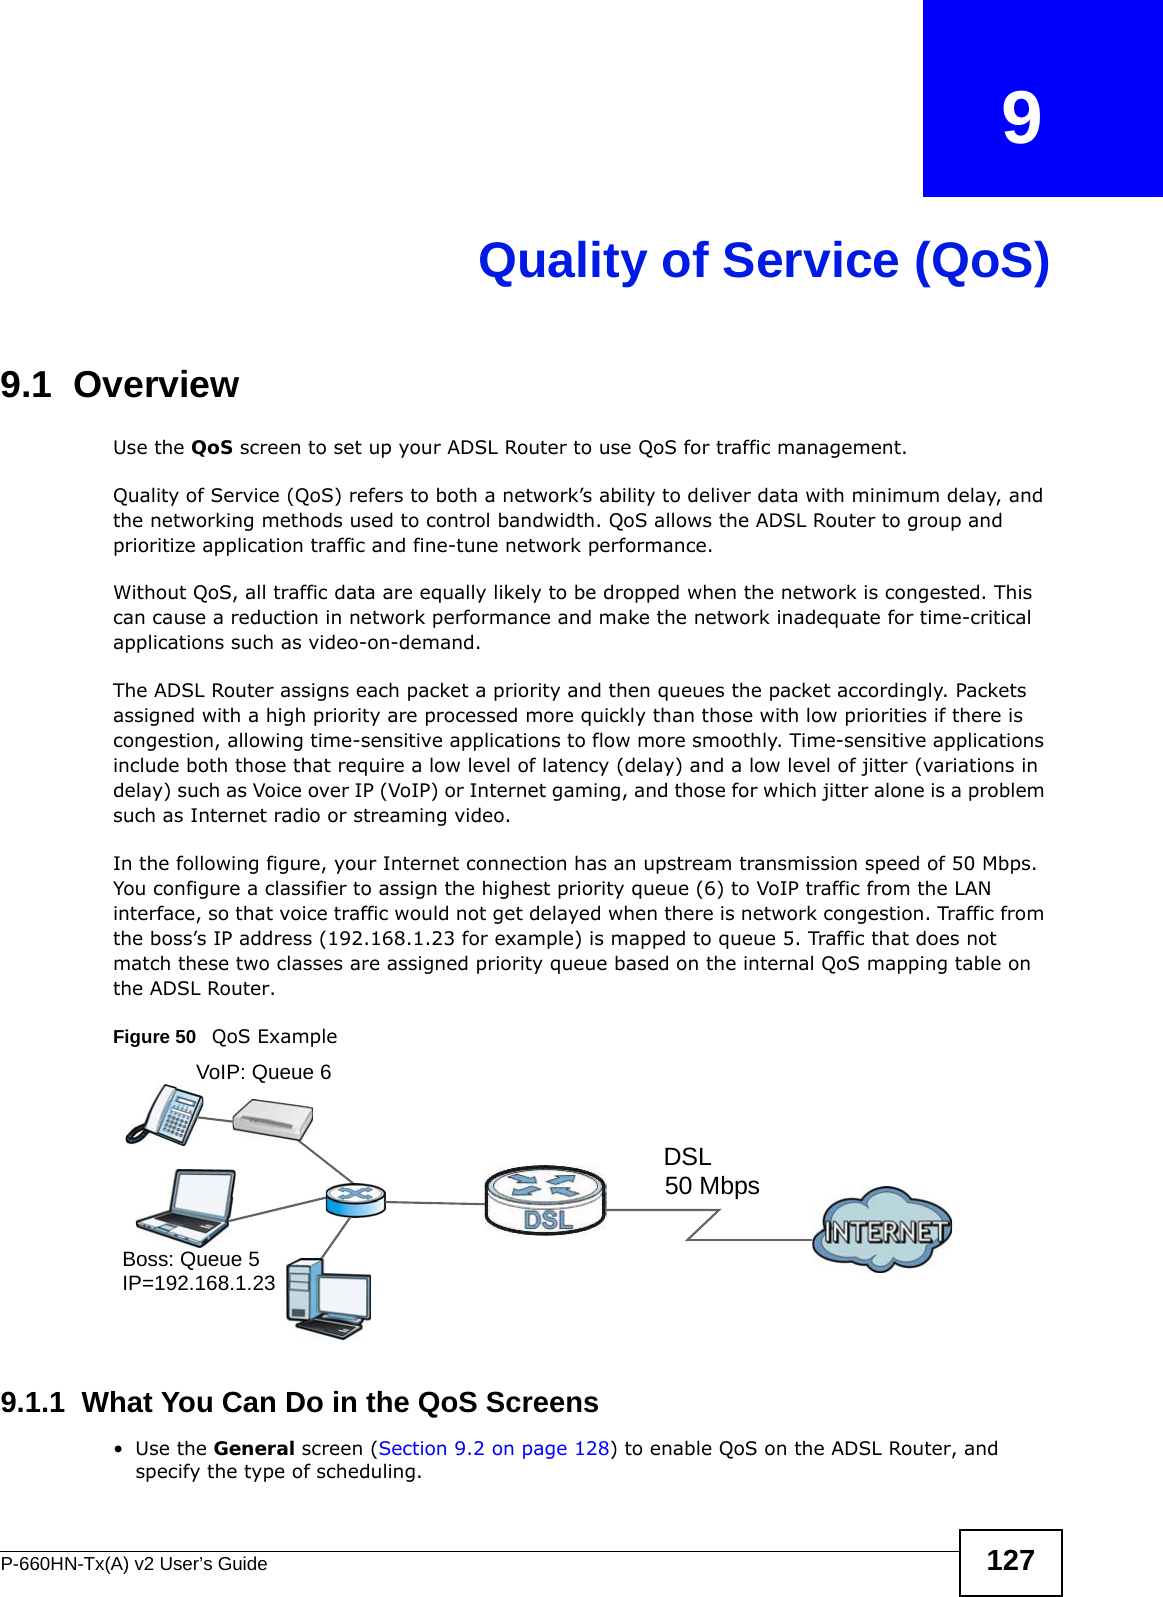 P-660HN-Tx(A) v2 User’s Guide 127CHAPTER   9Quality of Service (QoS)9.1  OverviewUse the QoS screen to set up your ADSL Router to use QoS for traffic management. Quality of Service (QoS) refers to both a network’s ability to deliver data with minimum delay, and the networking methods used to control bandwidth. QoS allows the ADSL Router to group and prioritize application traffic and fine-tune network performance. Without QoS, all traffic data are equally likely to be dropped when the network is congested. This can cause a reduction in network performance and make the network inadequate for time-critical applications such as video-on-demand.The ADSL Router assigns each packet a priority and then queues the packet accordingly. Packets assigned with a high priority are processed more quickly than those with low priorities if there is congestion, allowing time-sensitive applications to flow more smoothly. Time-sensitive applications include both those that require a low level of latency (delay) and a low level of jitter (variations in delay) such as Voice over IP (VoIP) or Internet gaming, and those for which jitter alone is a problem such as Internet radio or streaming video.In the following figure, your Internet connection has an upstream transmission speed of 50 Mbps. You configure a classifier to assign the highest priority queue (6) to VoIP traffic from the LAN interface, so that voice traffic would not get delayed when there is network congestion. Traffic from the boss’s IP address (192.168.1.23 for example) is mapped to queue 5. Traffic that does not match these two classes are assigned priority queue based on the internal QoS mapping table on the ADSL Router.Figure 50   QoS Example9.1.1  What You Can Do in the QoS Screens•Use the General screen (Section 9.2 on page 128) to enable QoS on the ADSL Router, and specify the type of scheduling.50 MbpsDSLVoIP: Queue 6Boss: Queue 5IP=192.168.1.23